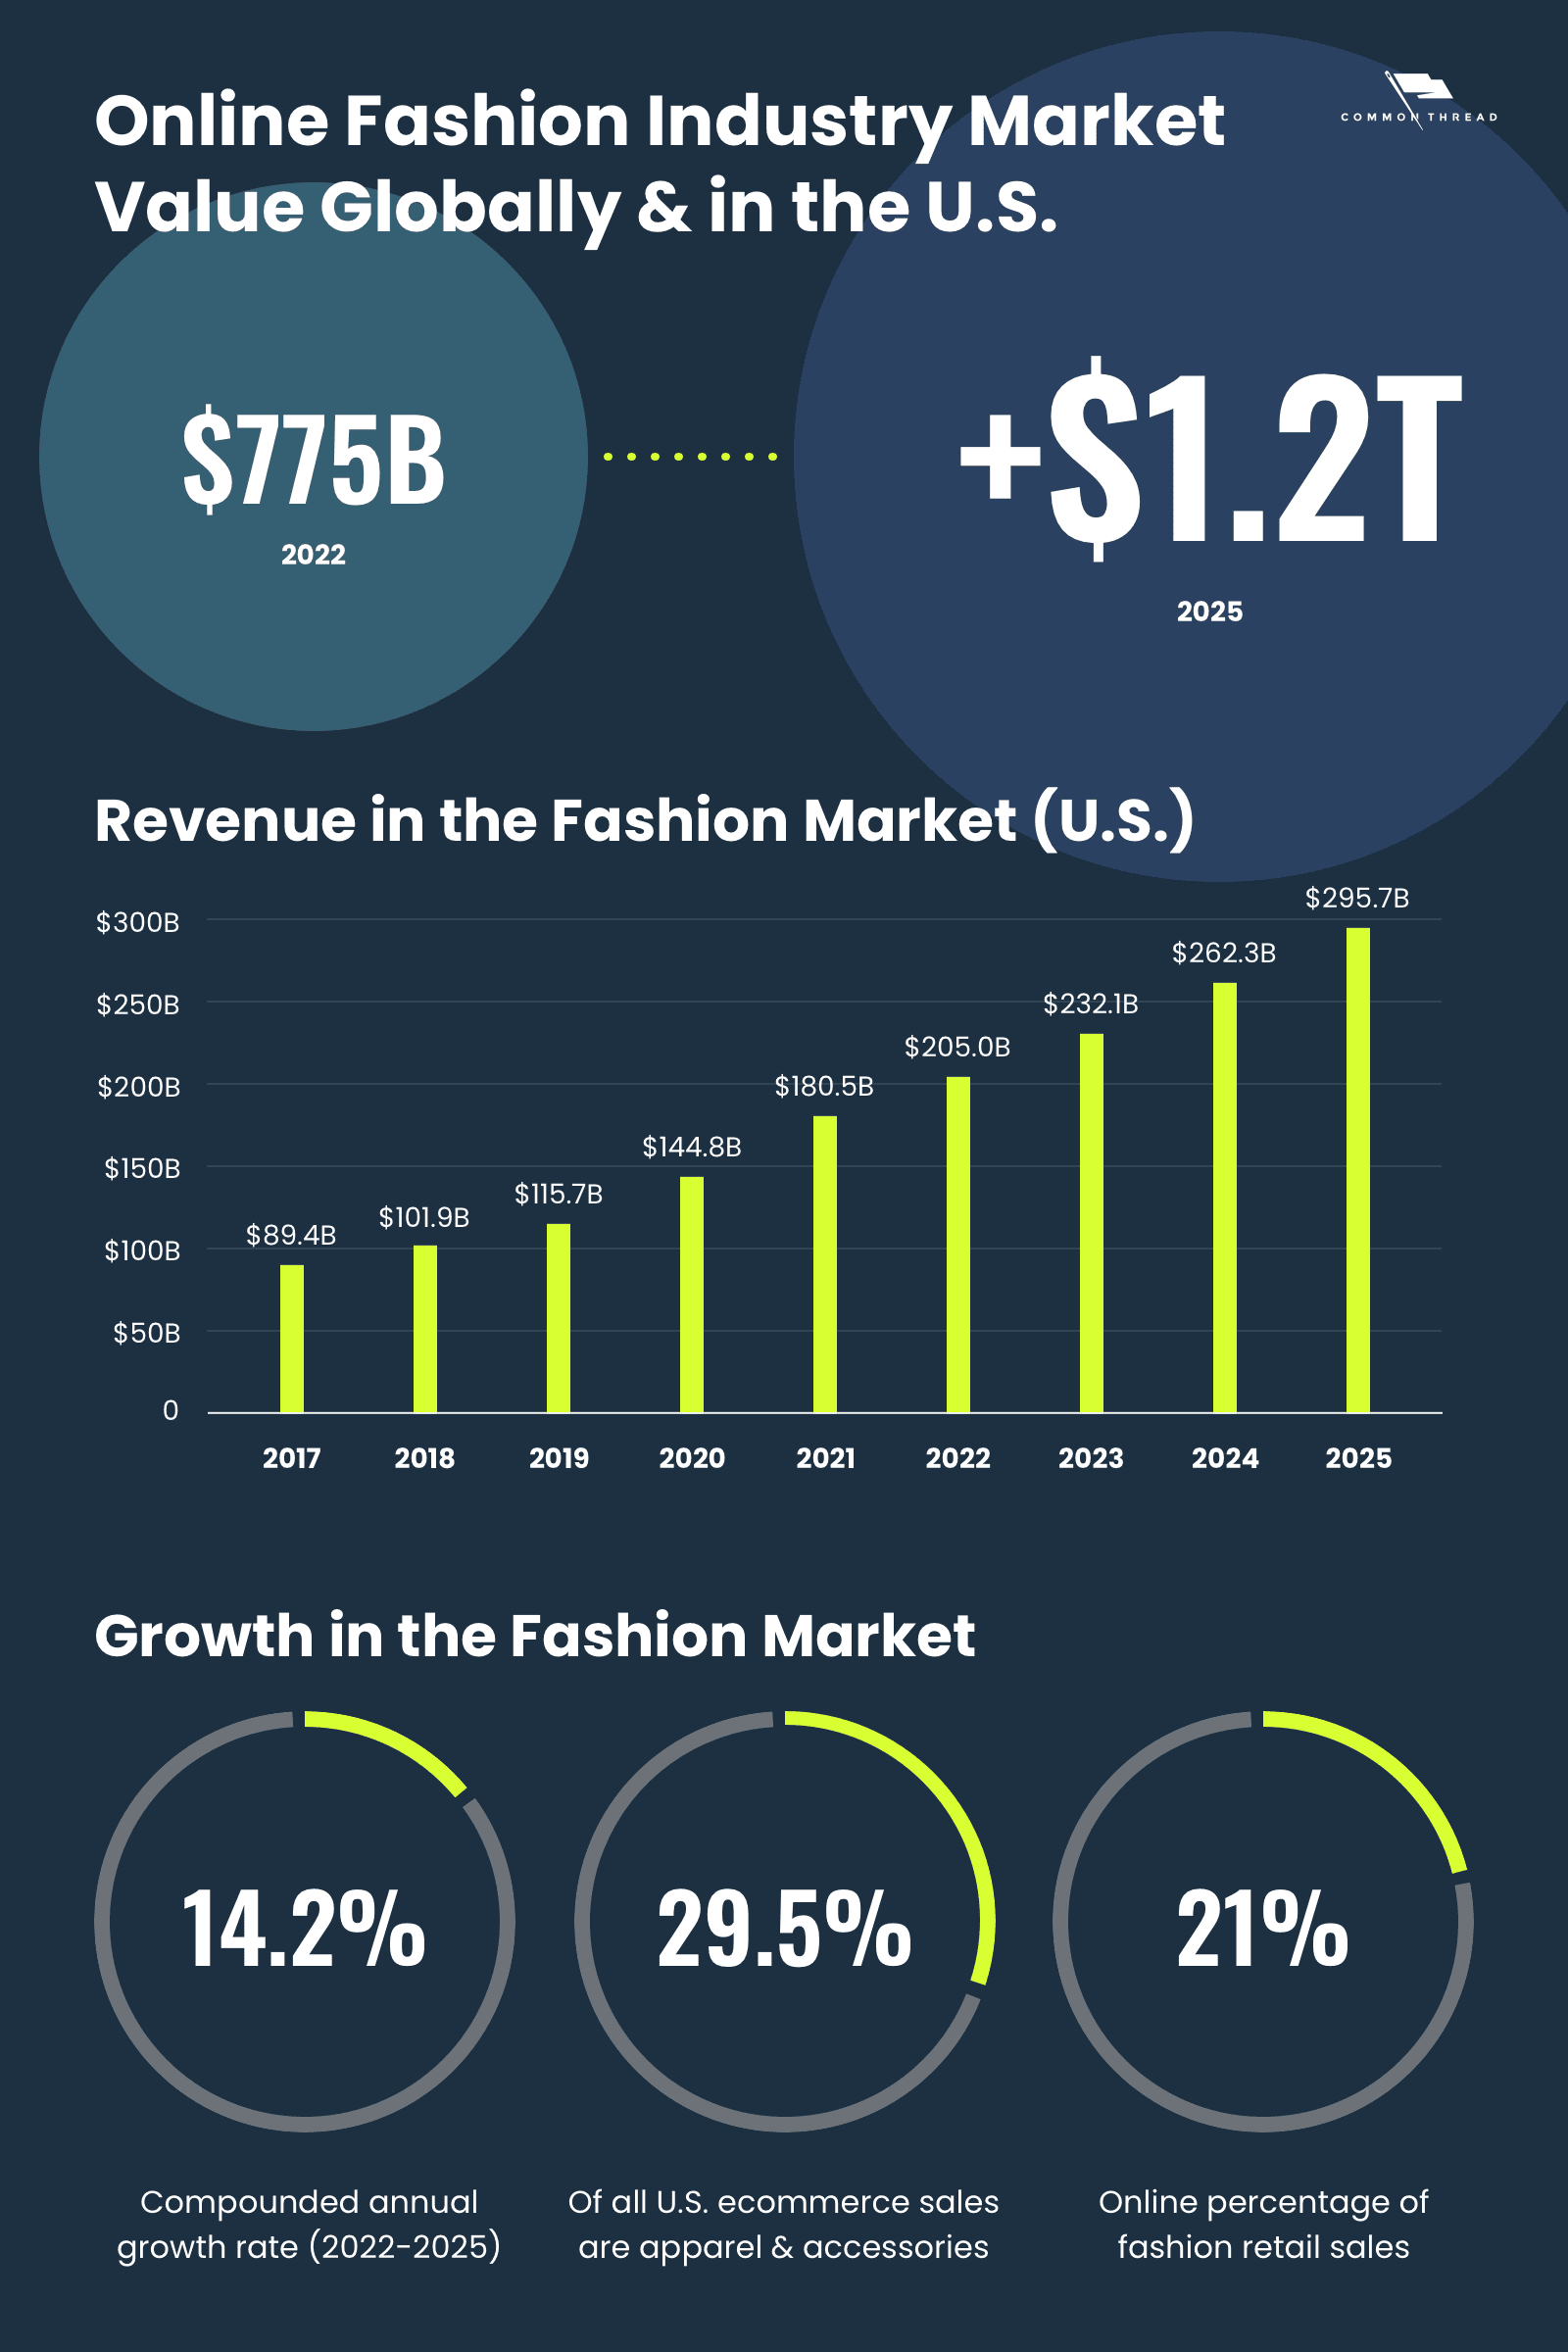 Online Fashion Industry Market Value Globally and in the United States